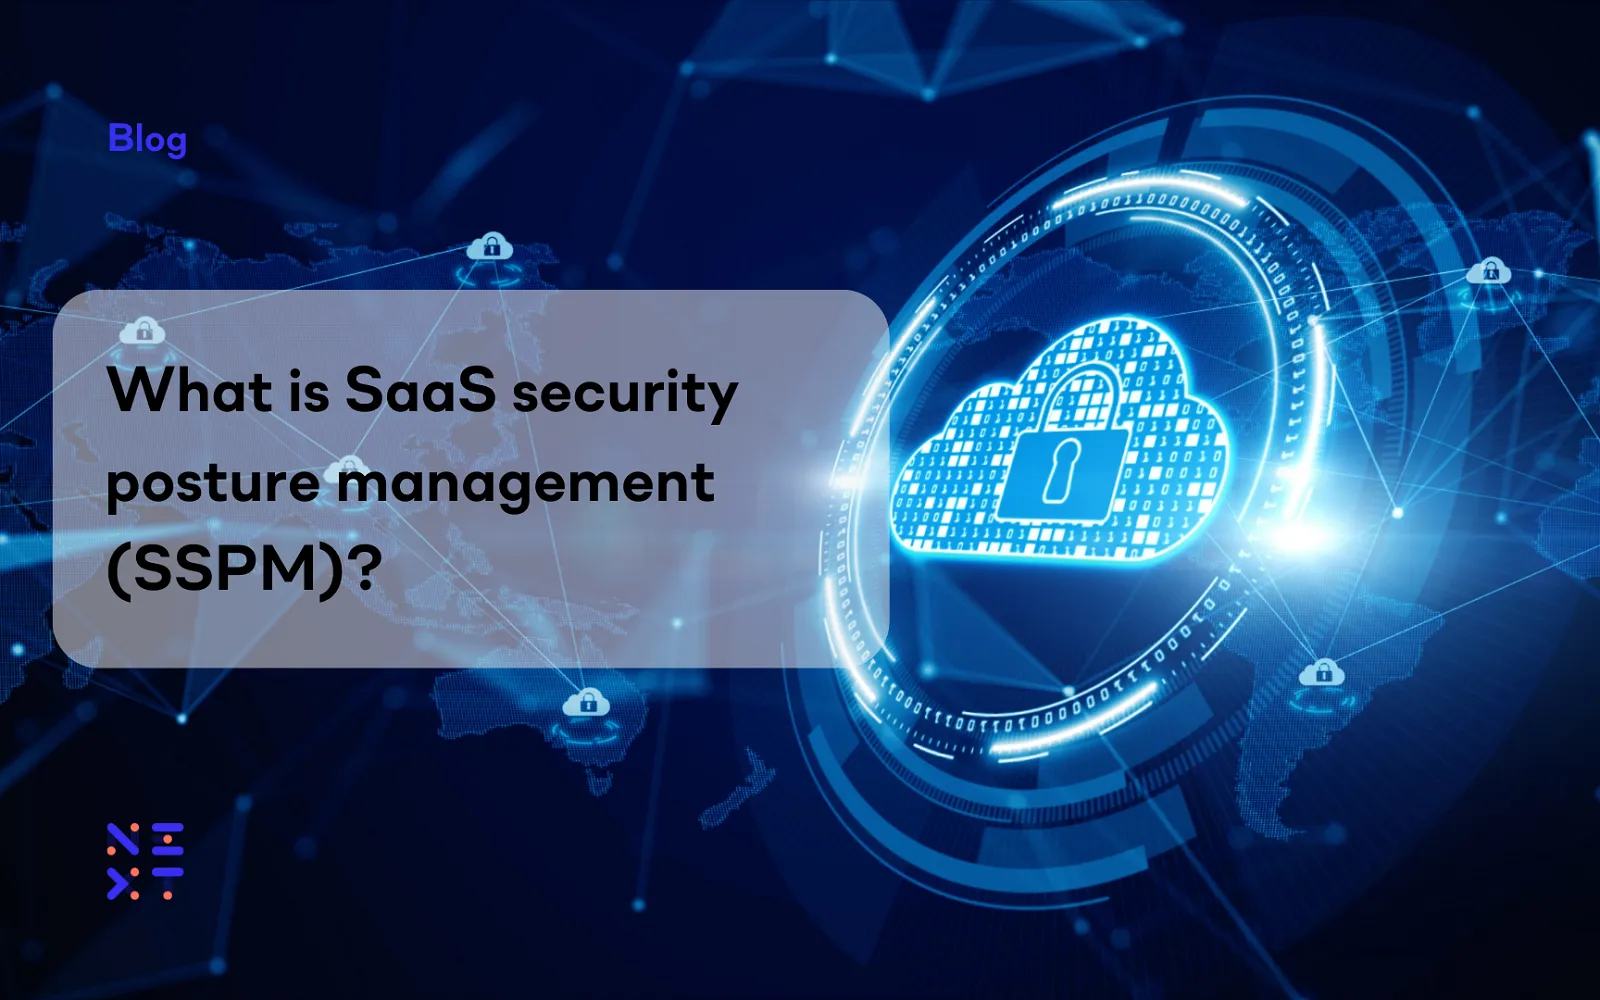 What is SaaS security posture management (SSPM)?